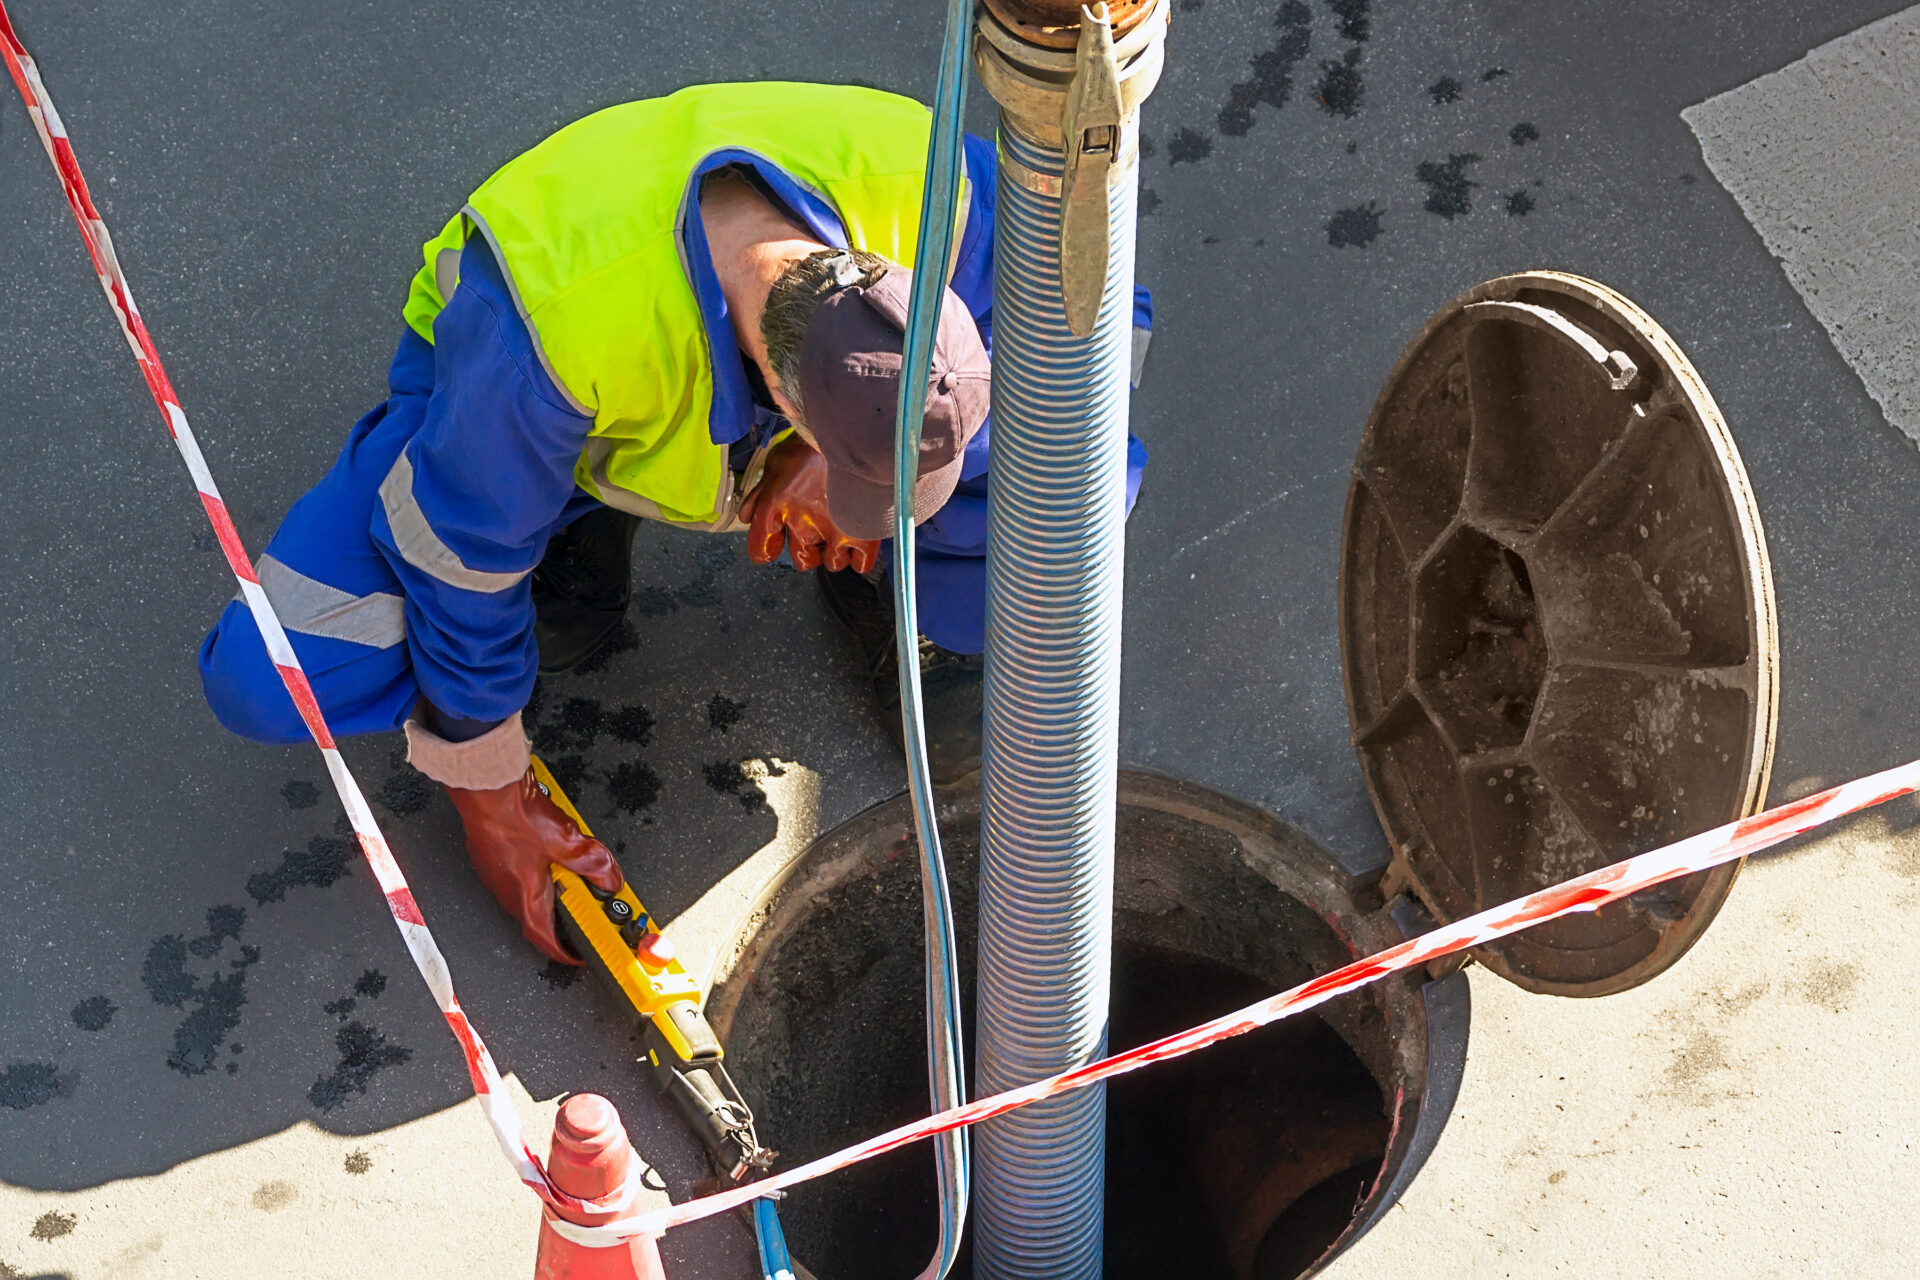 sewerage truck service and utility workers for cleaning sewer